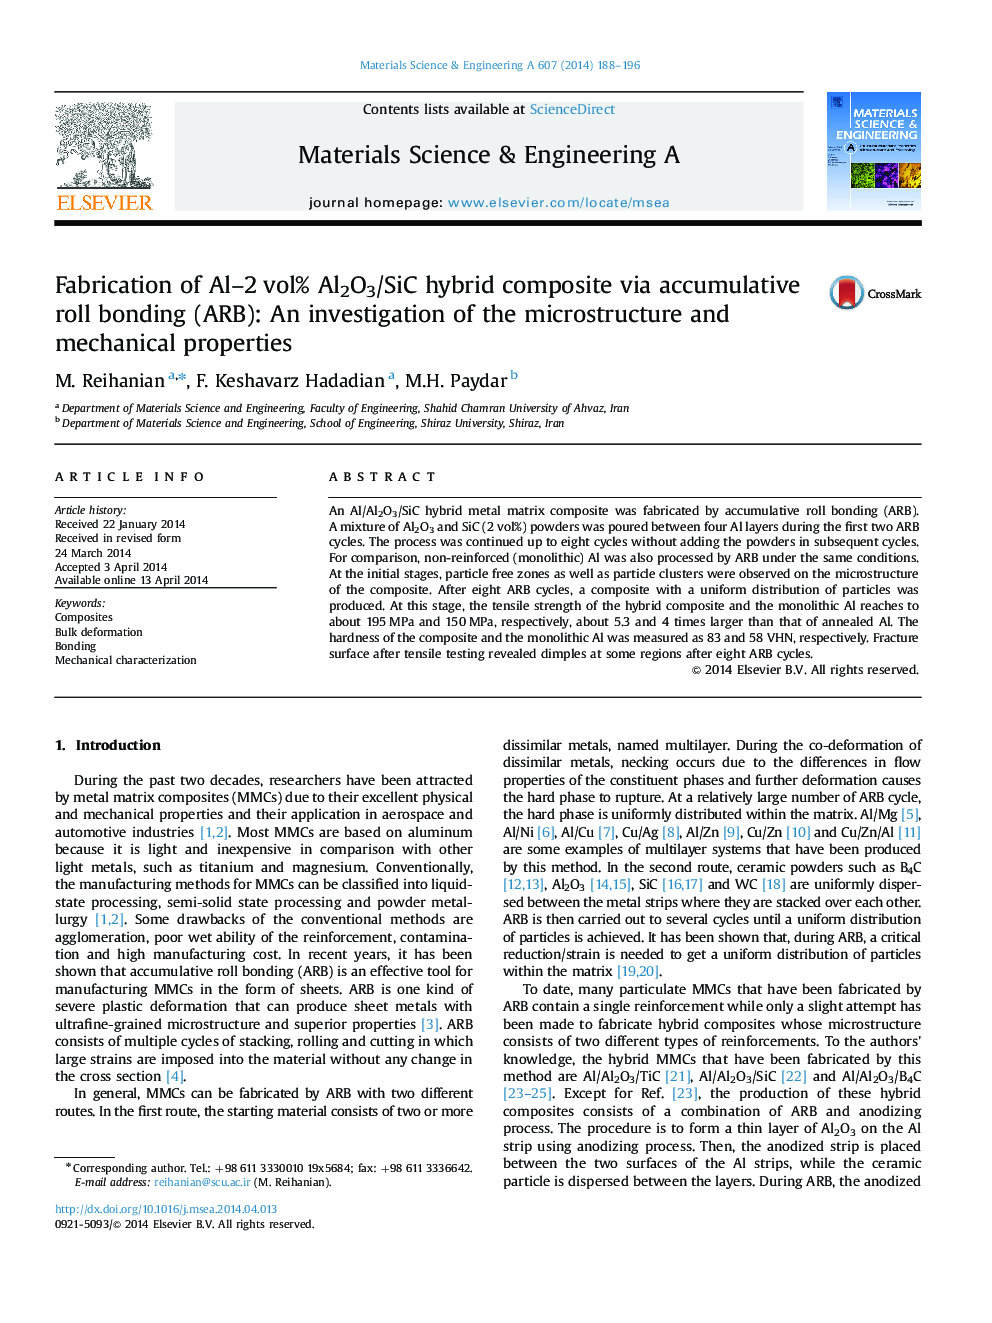 Fabrication of Al-2Â vol% Al2O3/SiC hybrid composite via accumulative roll bonding (ARB): An investigation of the microstructure and mechanical properties